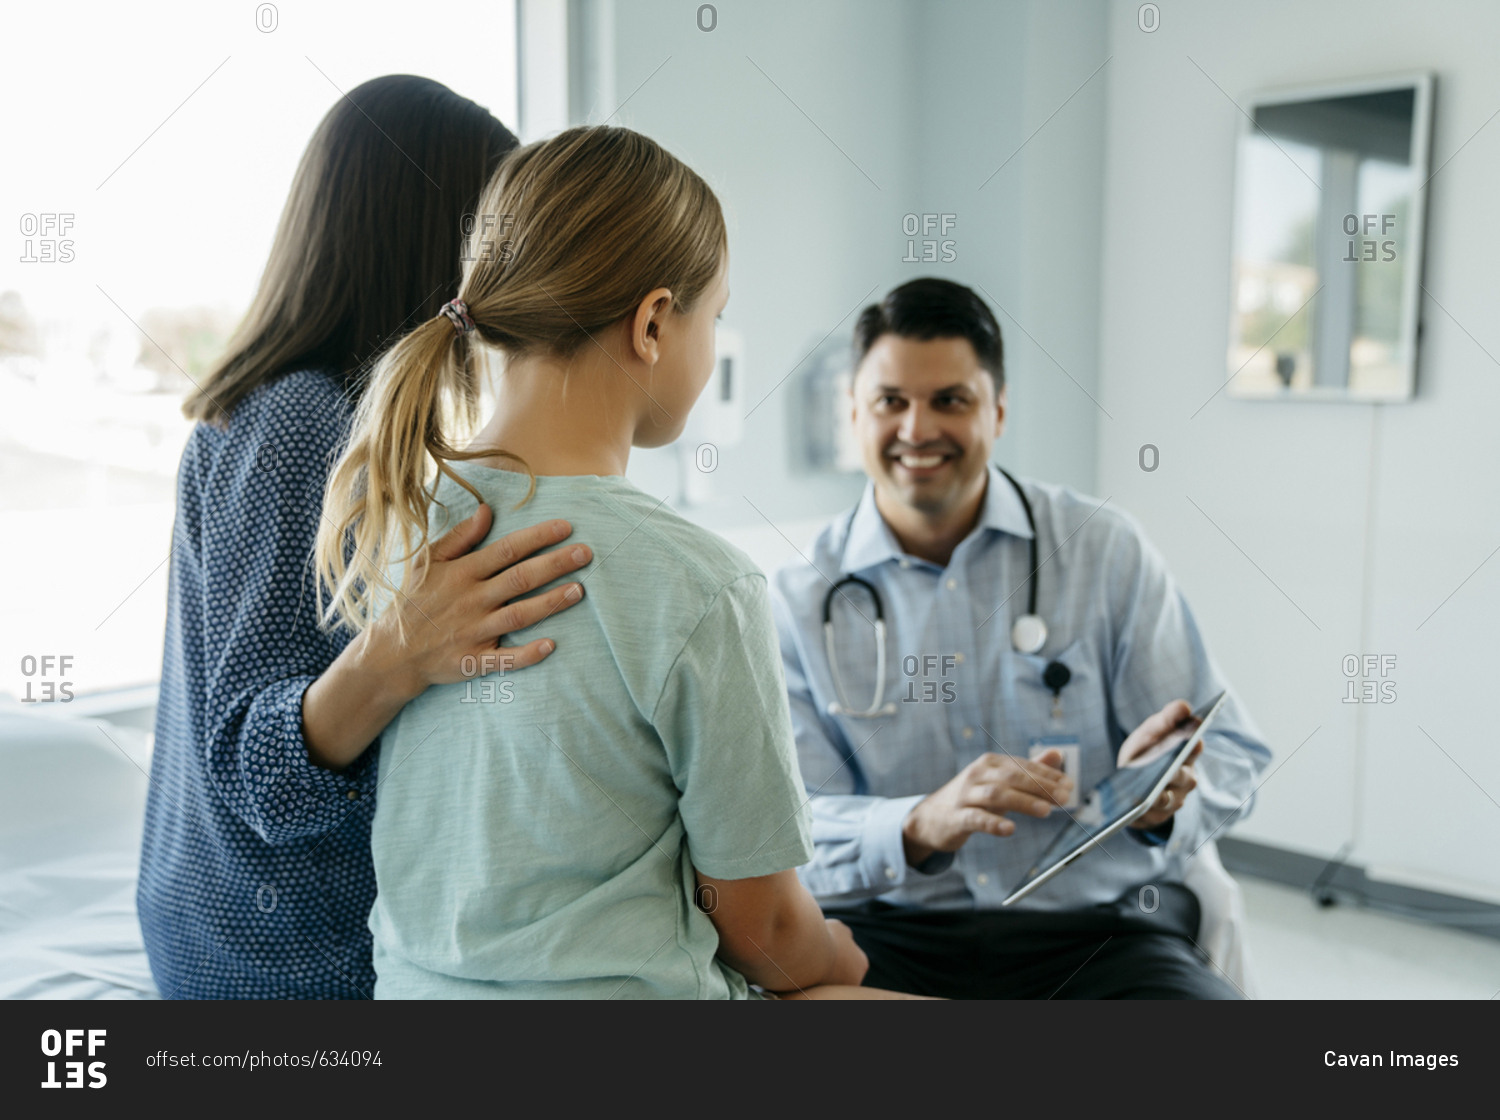 Cheerful pediatrician showing x-ray image on tablet computer to mother and daughter in medical examination room